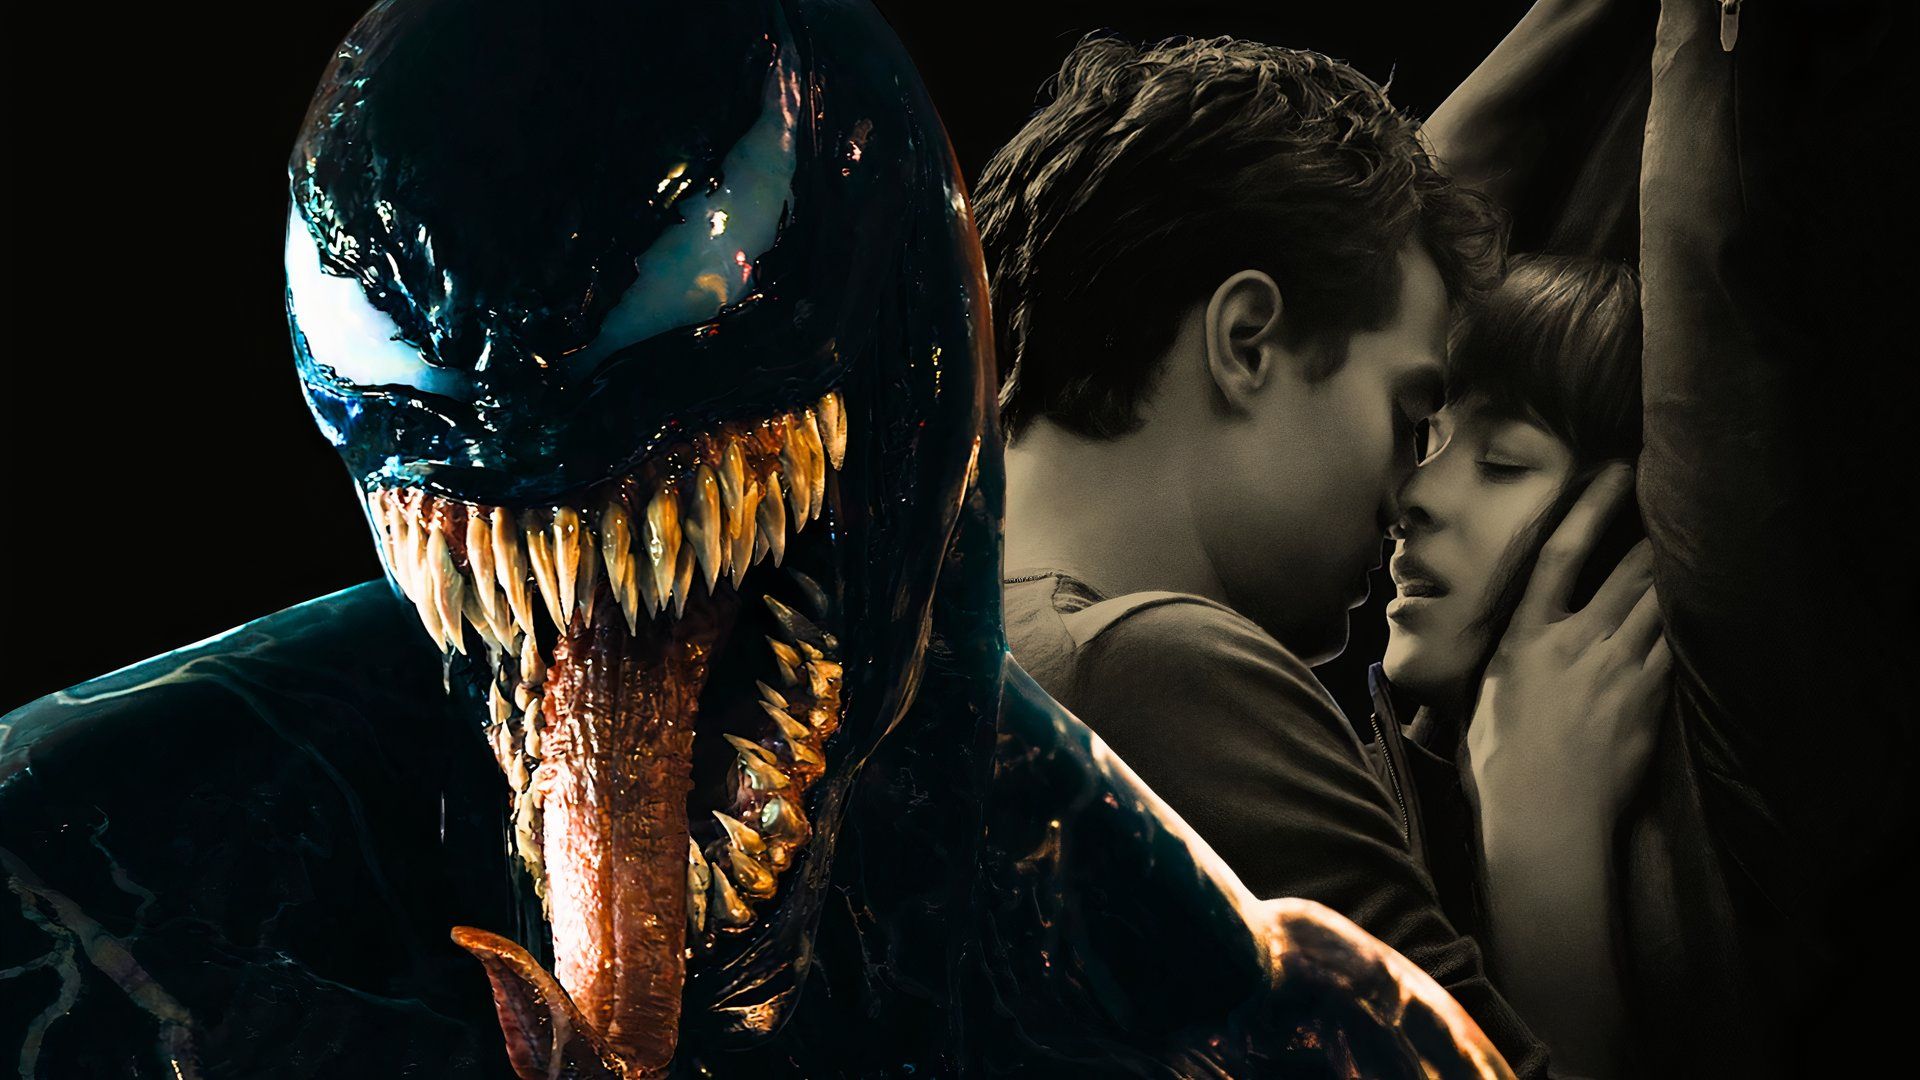 A custom image of Venom and Fifty Shades of Grey